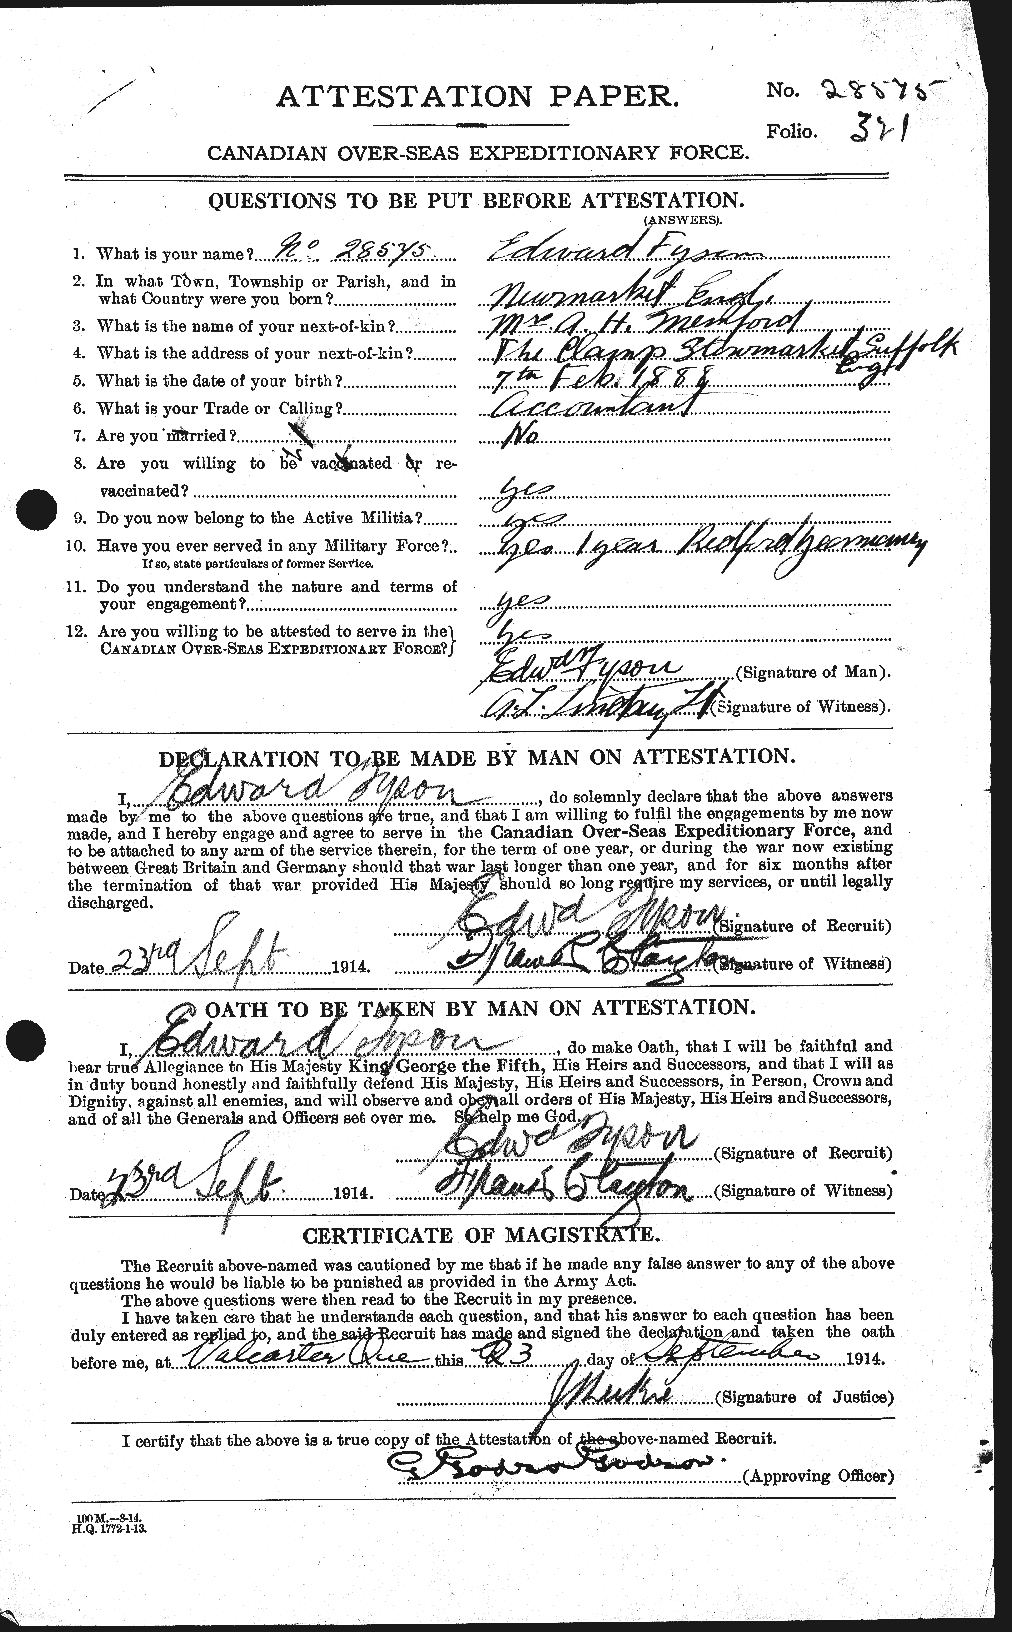 Personnel Records of the First World War - CEF 338899a